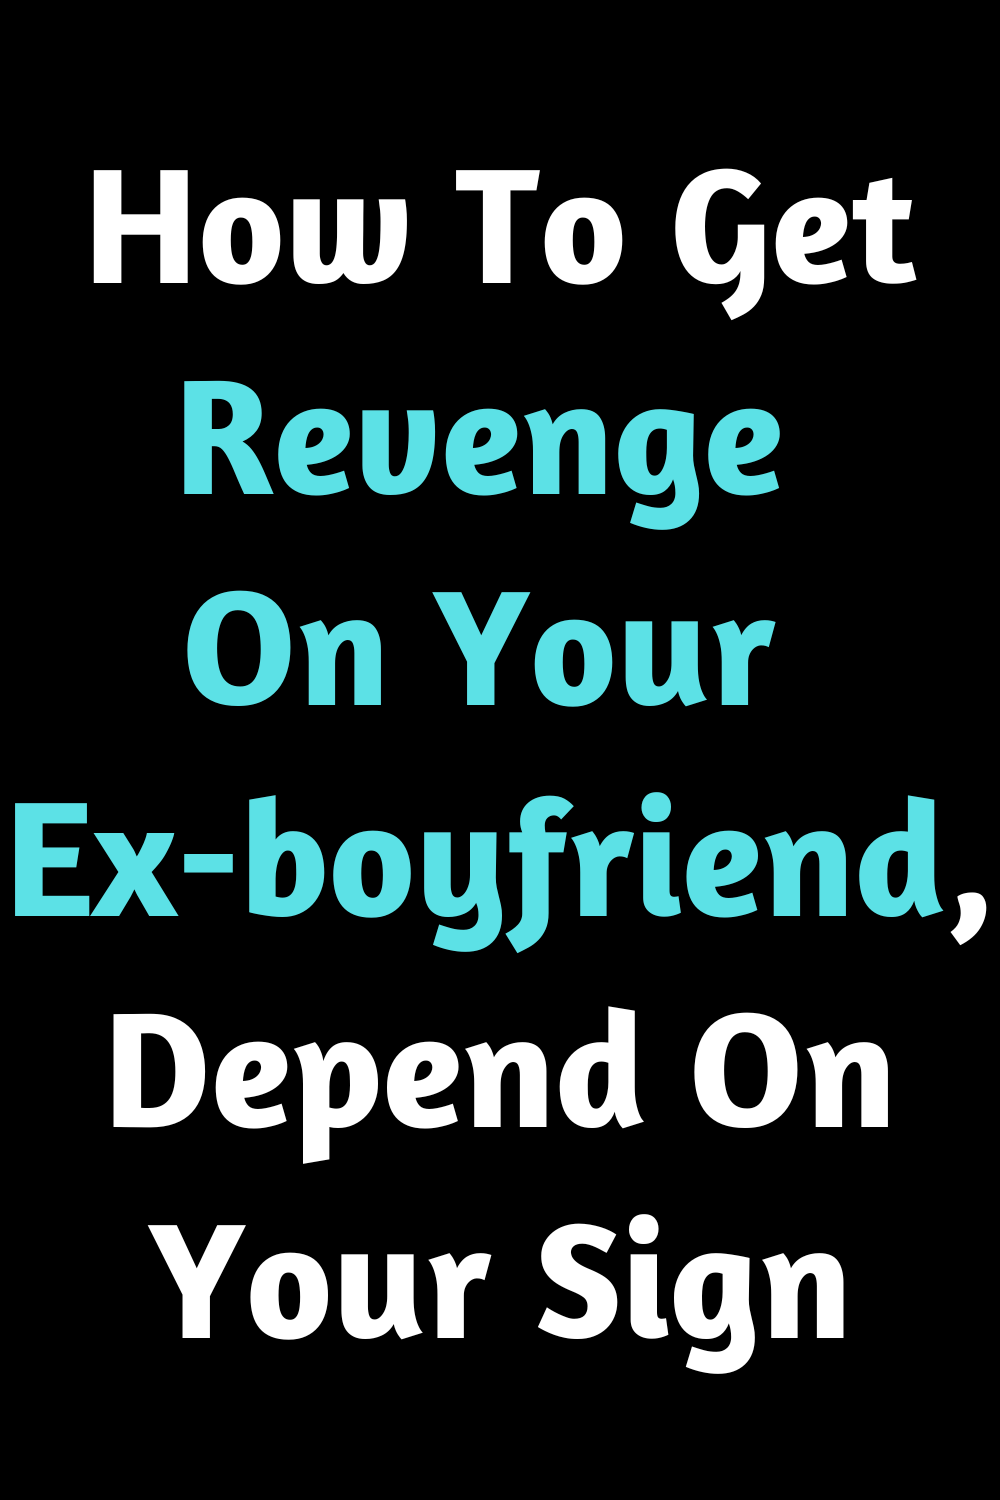 How To Get Revenge On Your Ex-boyfriend, Depend On Your Sign